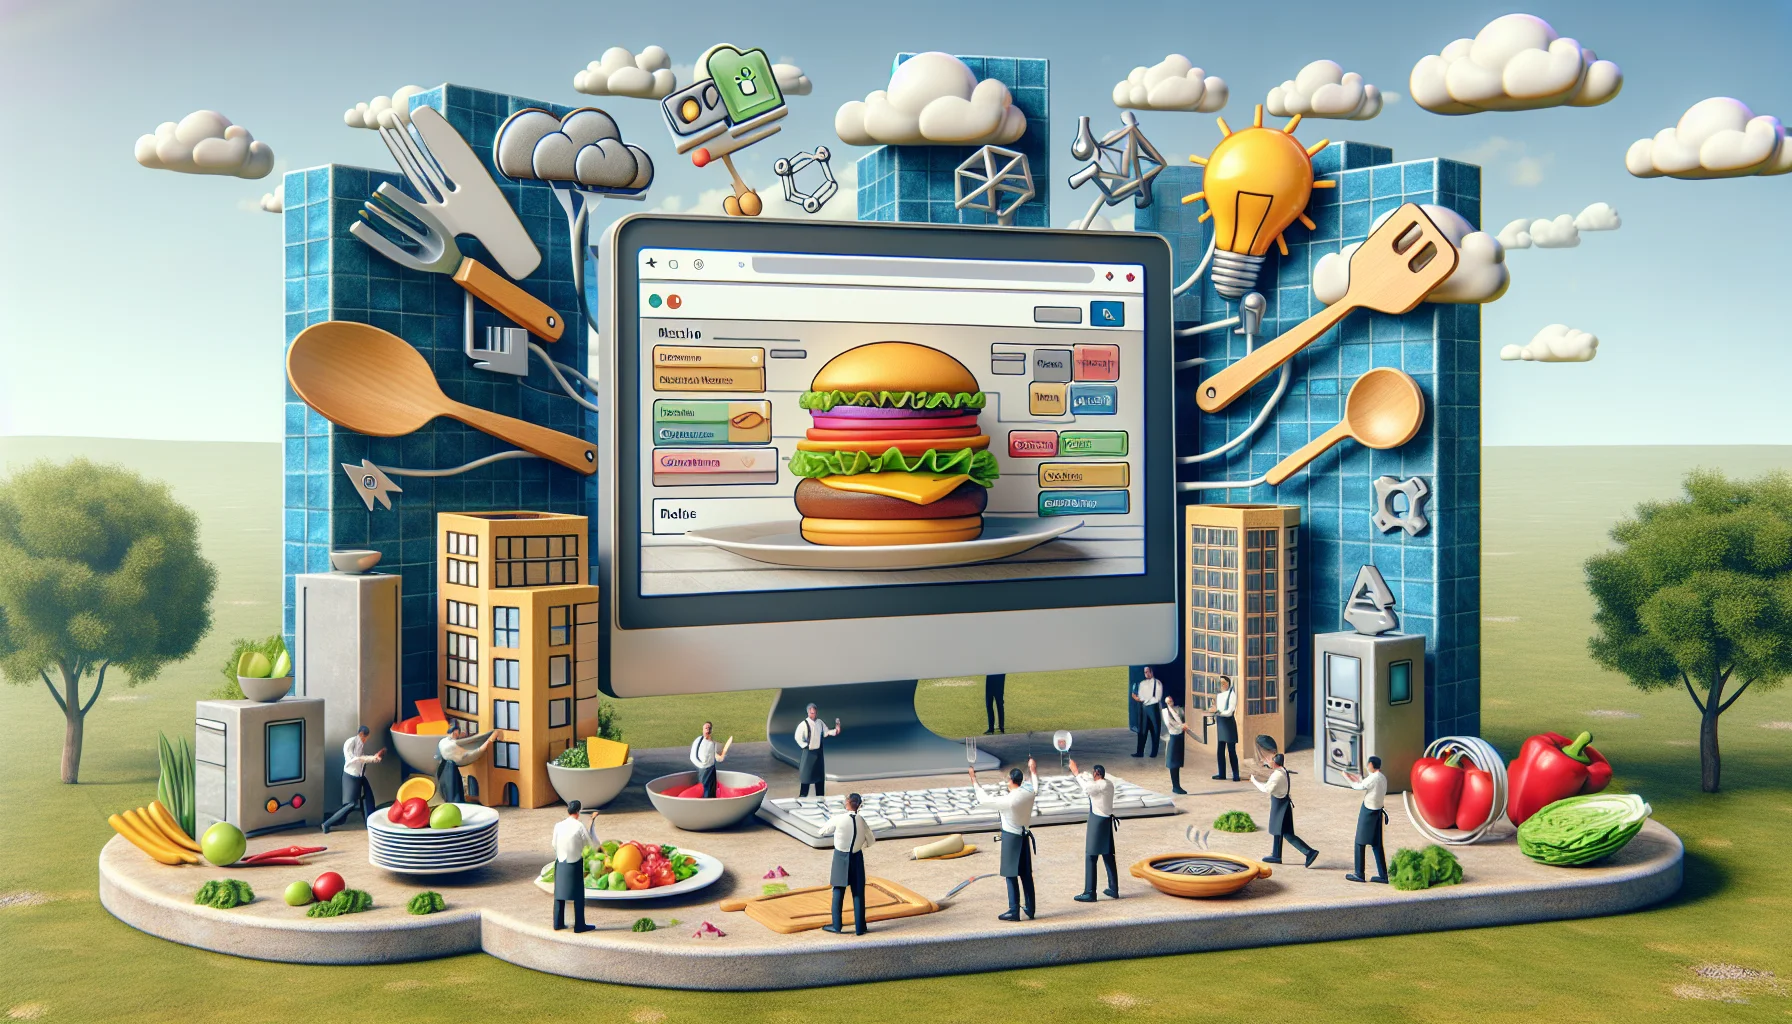 Imagine a humorous digital landscape. At the center, there's an oversized desktop monitor displaying a vibrant, interactive webpage with elements suggesting it's a restaurant. Beside it, a variety of iconic web tools like menus, plug-ins, widgets, and coding icons are animatedly ‘cooking’ up web components on a large chef's table. The scene is playful, suggesting that building a restaurant website is as fun and creative as cooking up a gourmet meal. The background subtly hints at the reliable nature of web hosting services symbolized by sturdy, digital 'pillars' supporting a cloud.